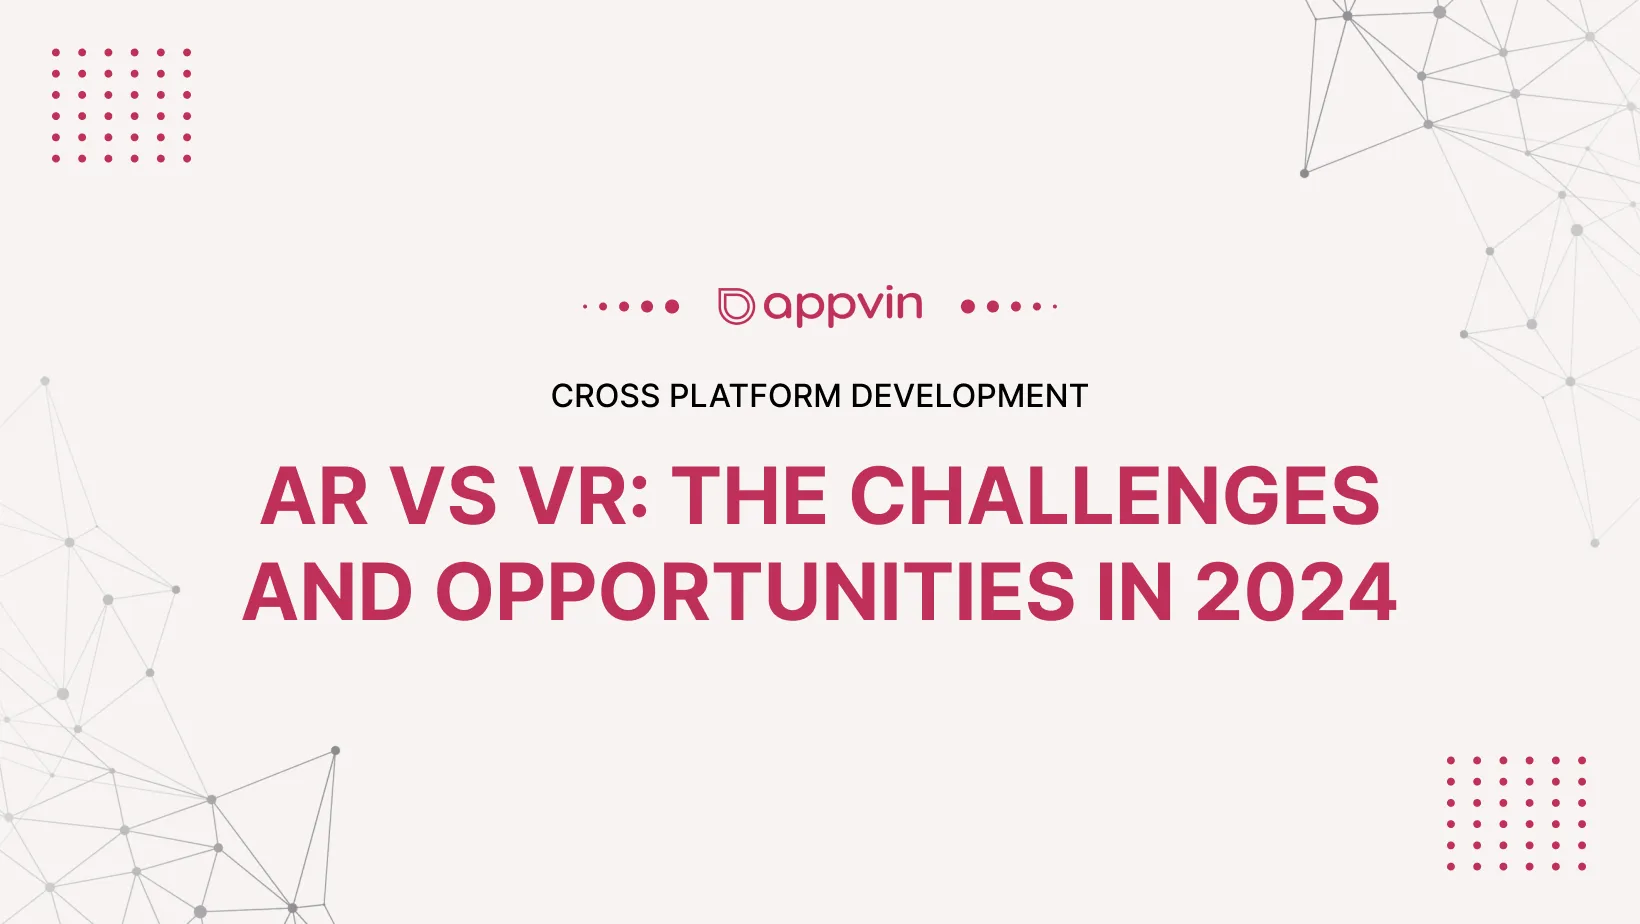 AR vs VR: The Challenges and Opportunities in 2024 